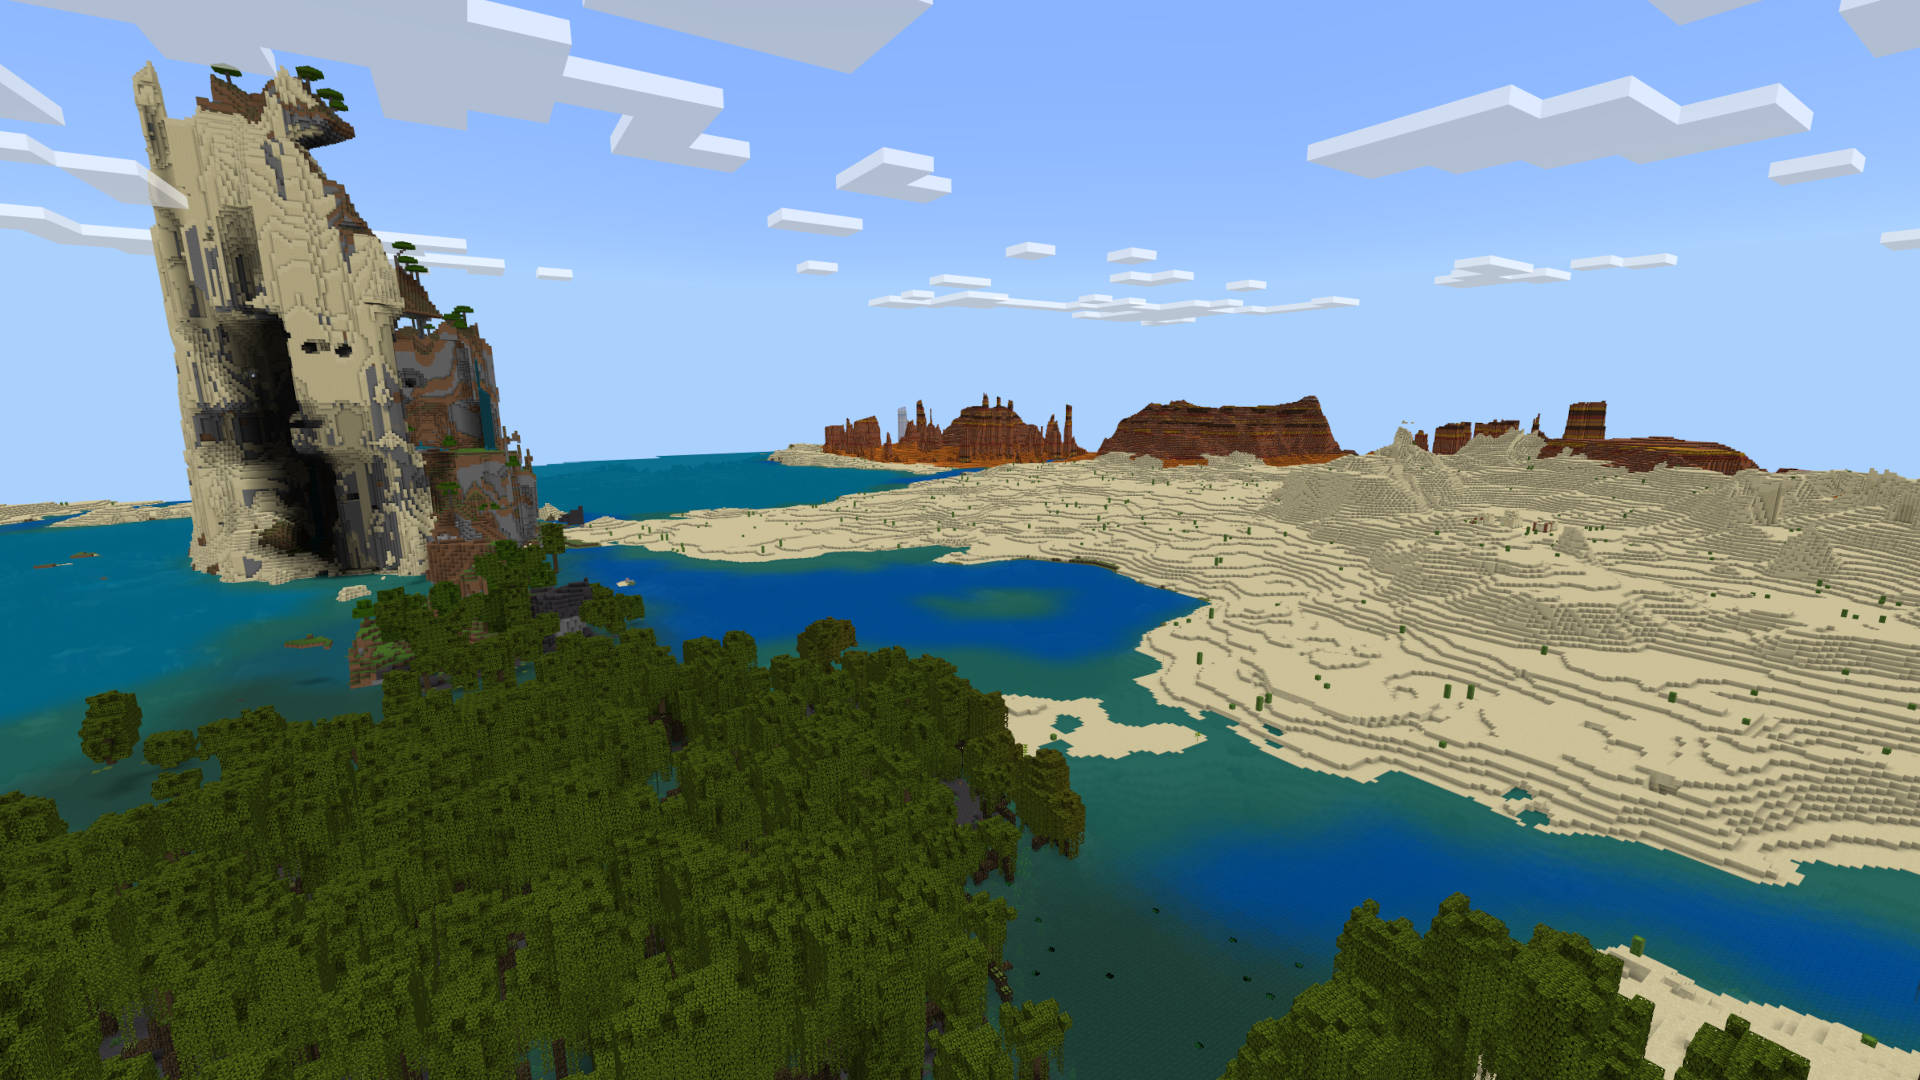 Best Minecraft seeds: a spire in the middle of the water, surrounded by a swamp and desert. A desert is in the background and the badlands are in the distance.